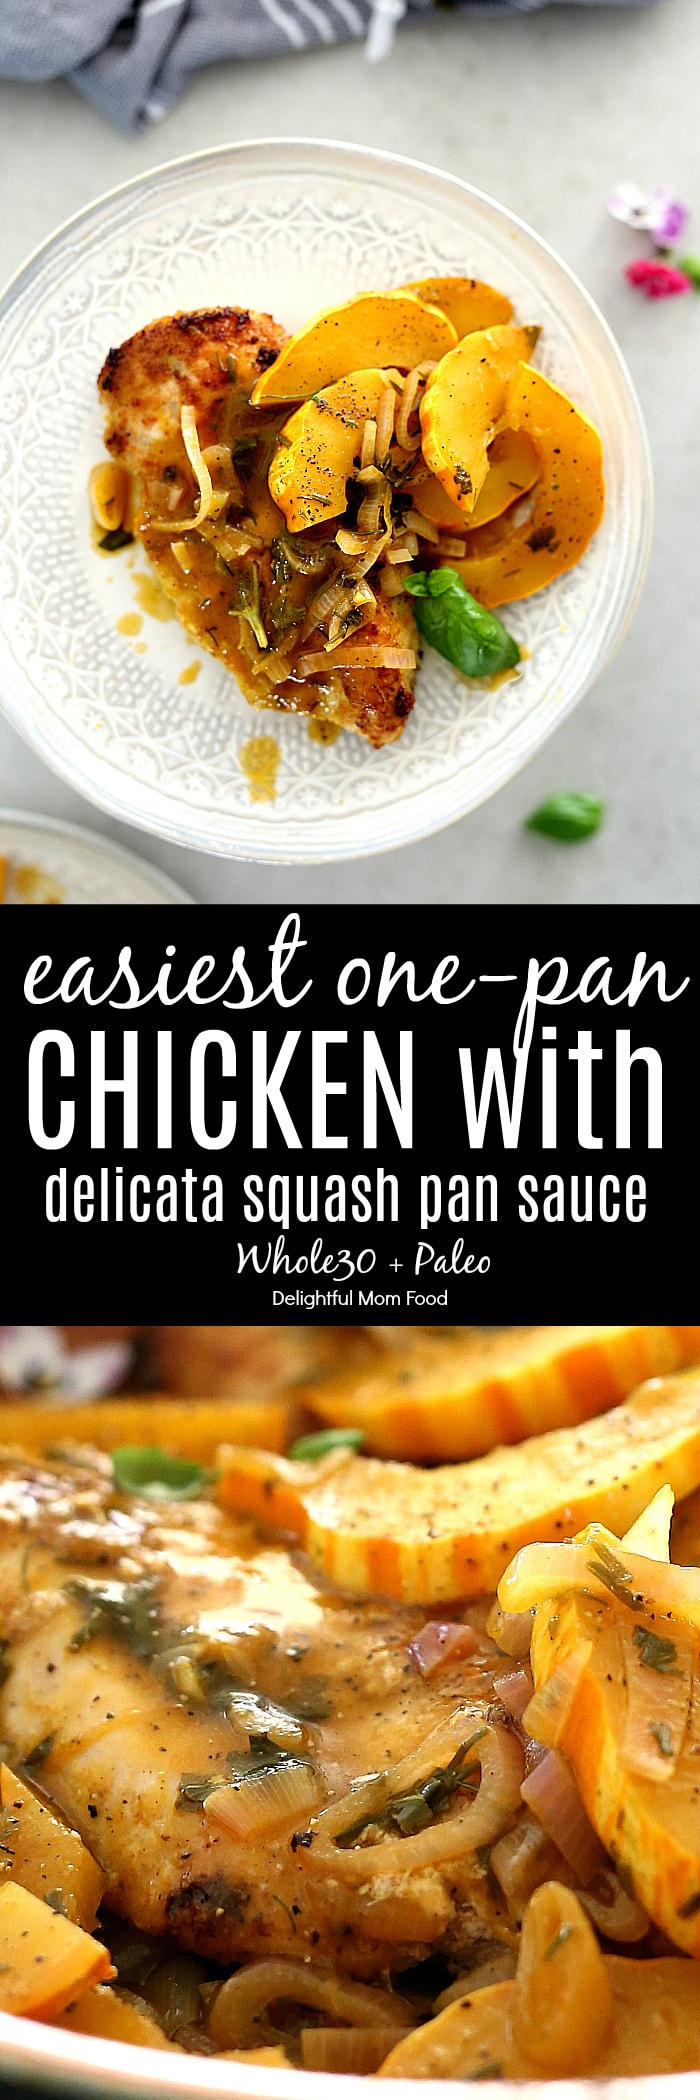 Easy chicken breast recipe with delicata squash & shallot sauce made in one-pan in 30 minutes! Learn how to make a crispy, juicy paleo chicken breast on the stove with these secrets. It is a Whole30, Keto, paleo approved dish the whole family will love! #easy #chicken #recipe #glutenfree #Whole30 #paleo #onepan #Keto #sauce #30minutemeals #healthy | Recipe at delightfulmomfood.com